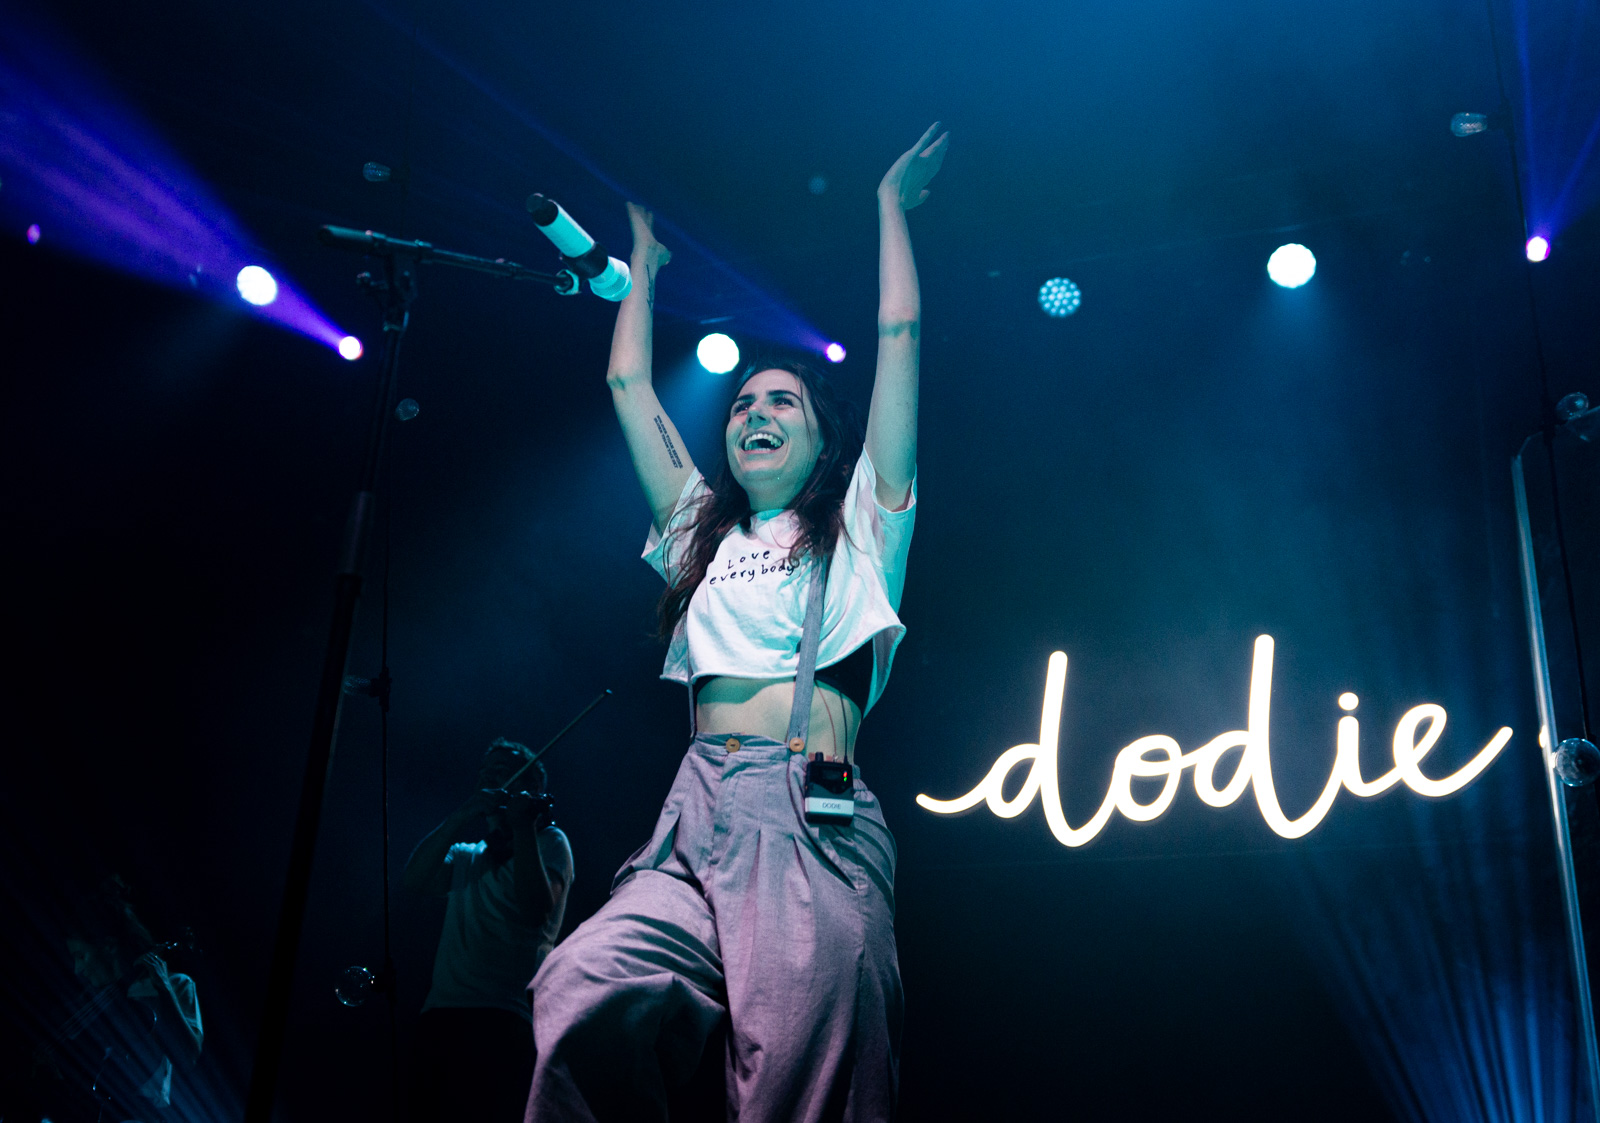 Concert review Unapologetically authentic show shares dodie’s life